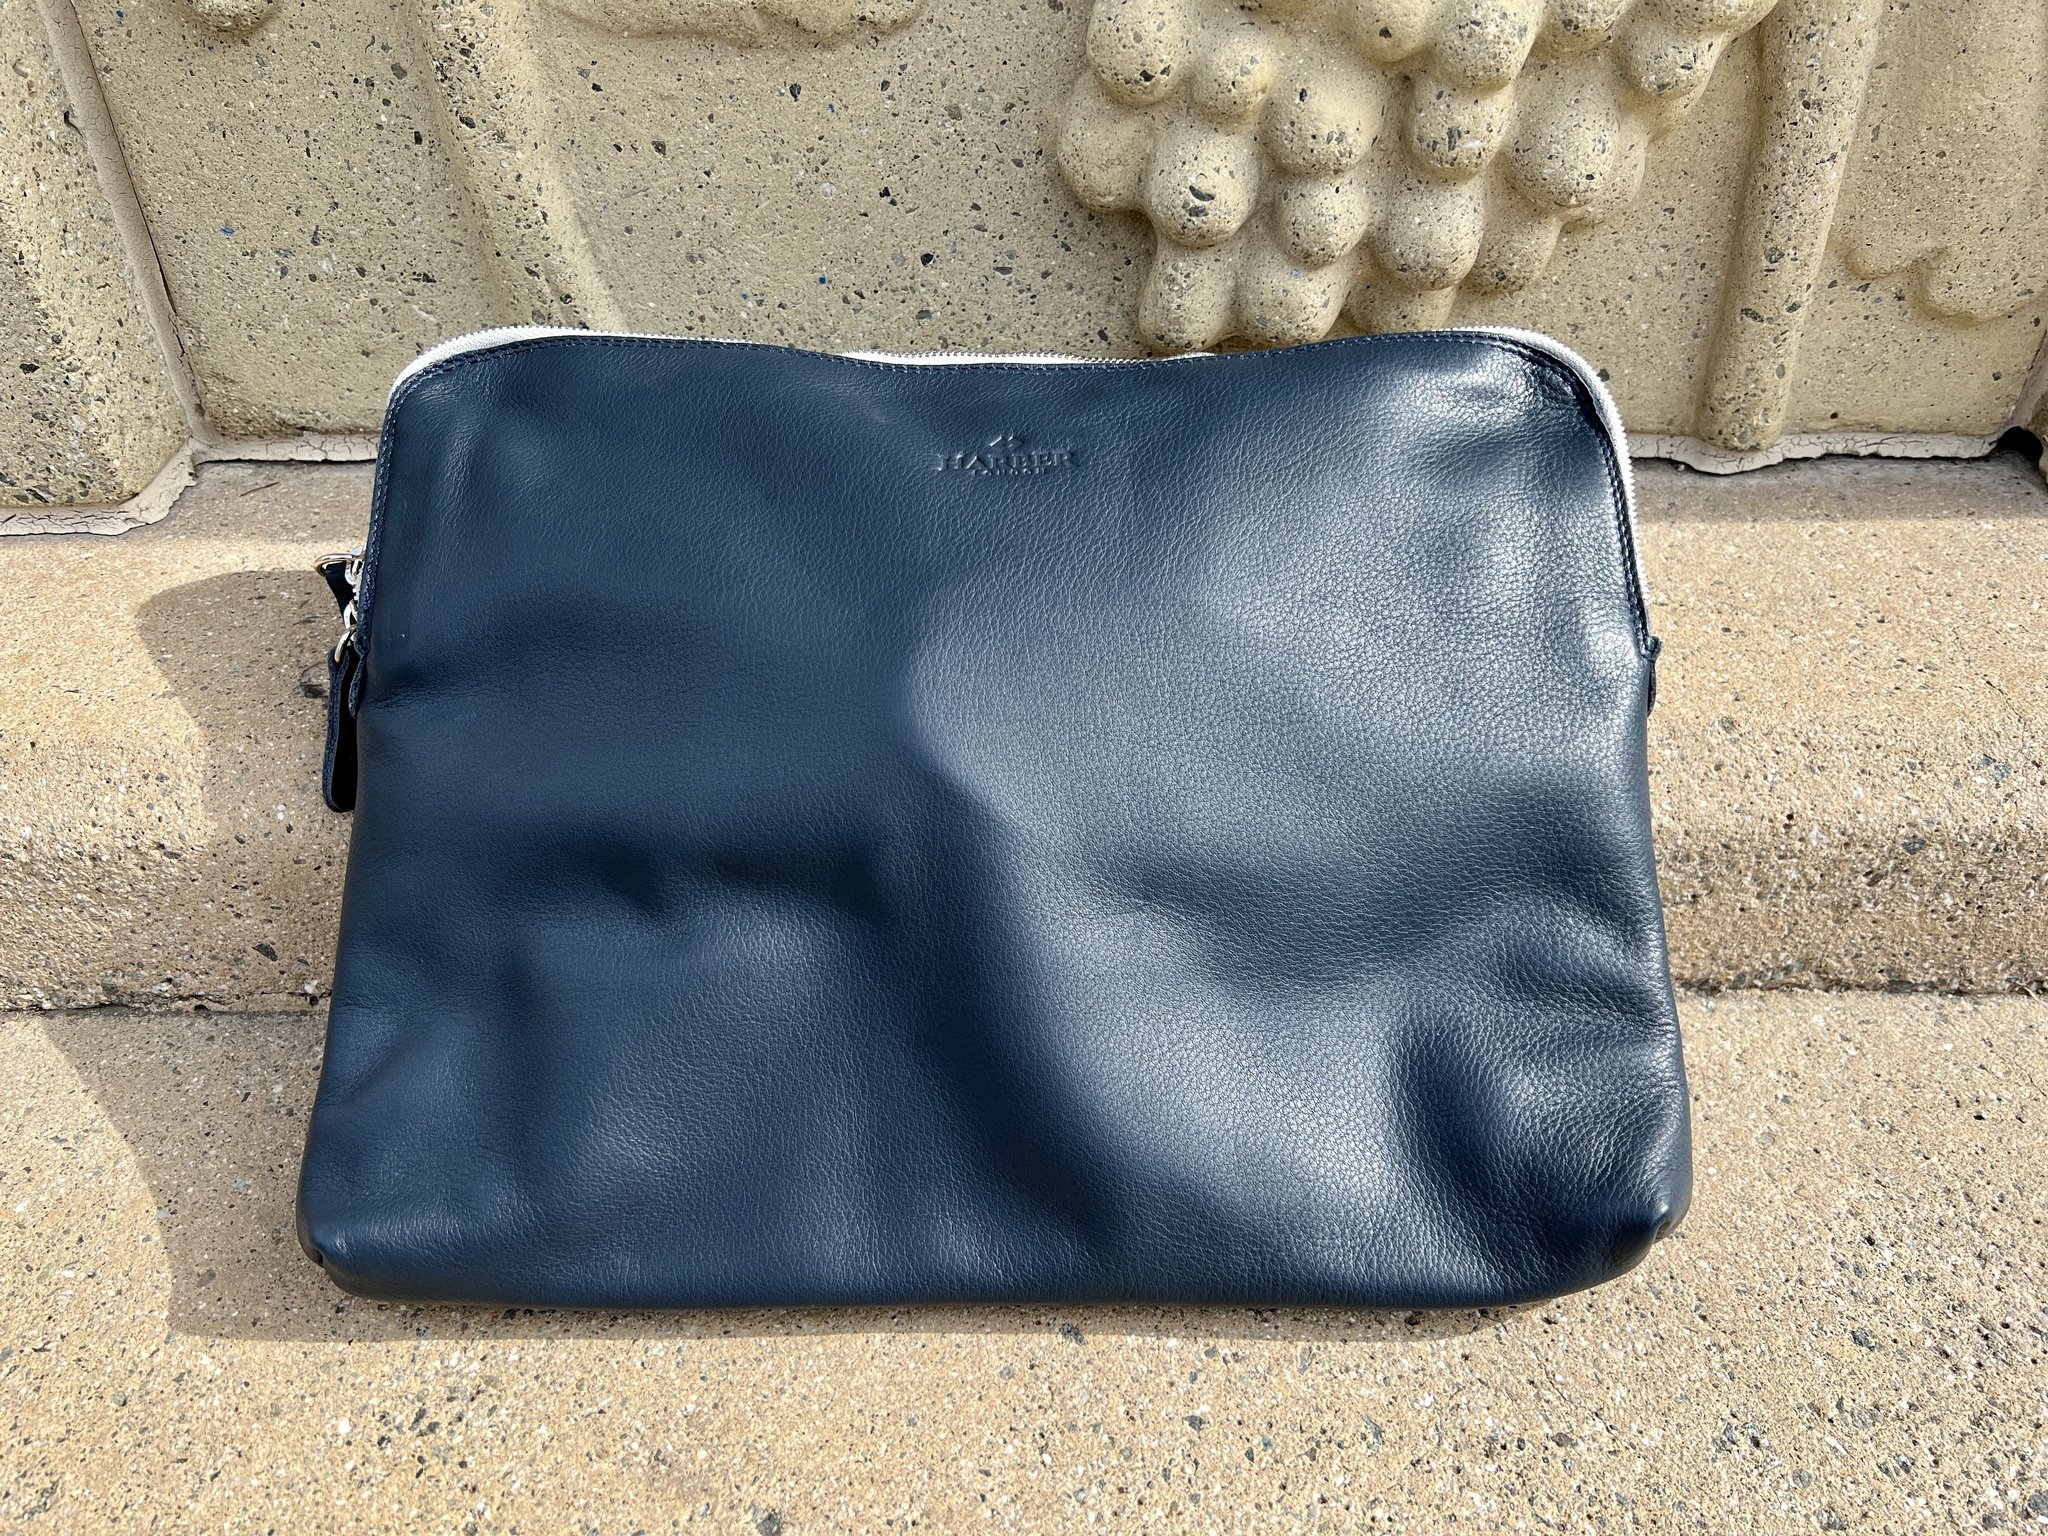 Harber London Carry-All MacBook Folio review: Elegant EDC for your